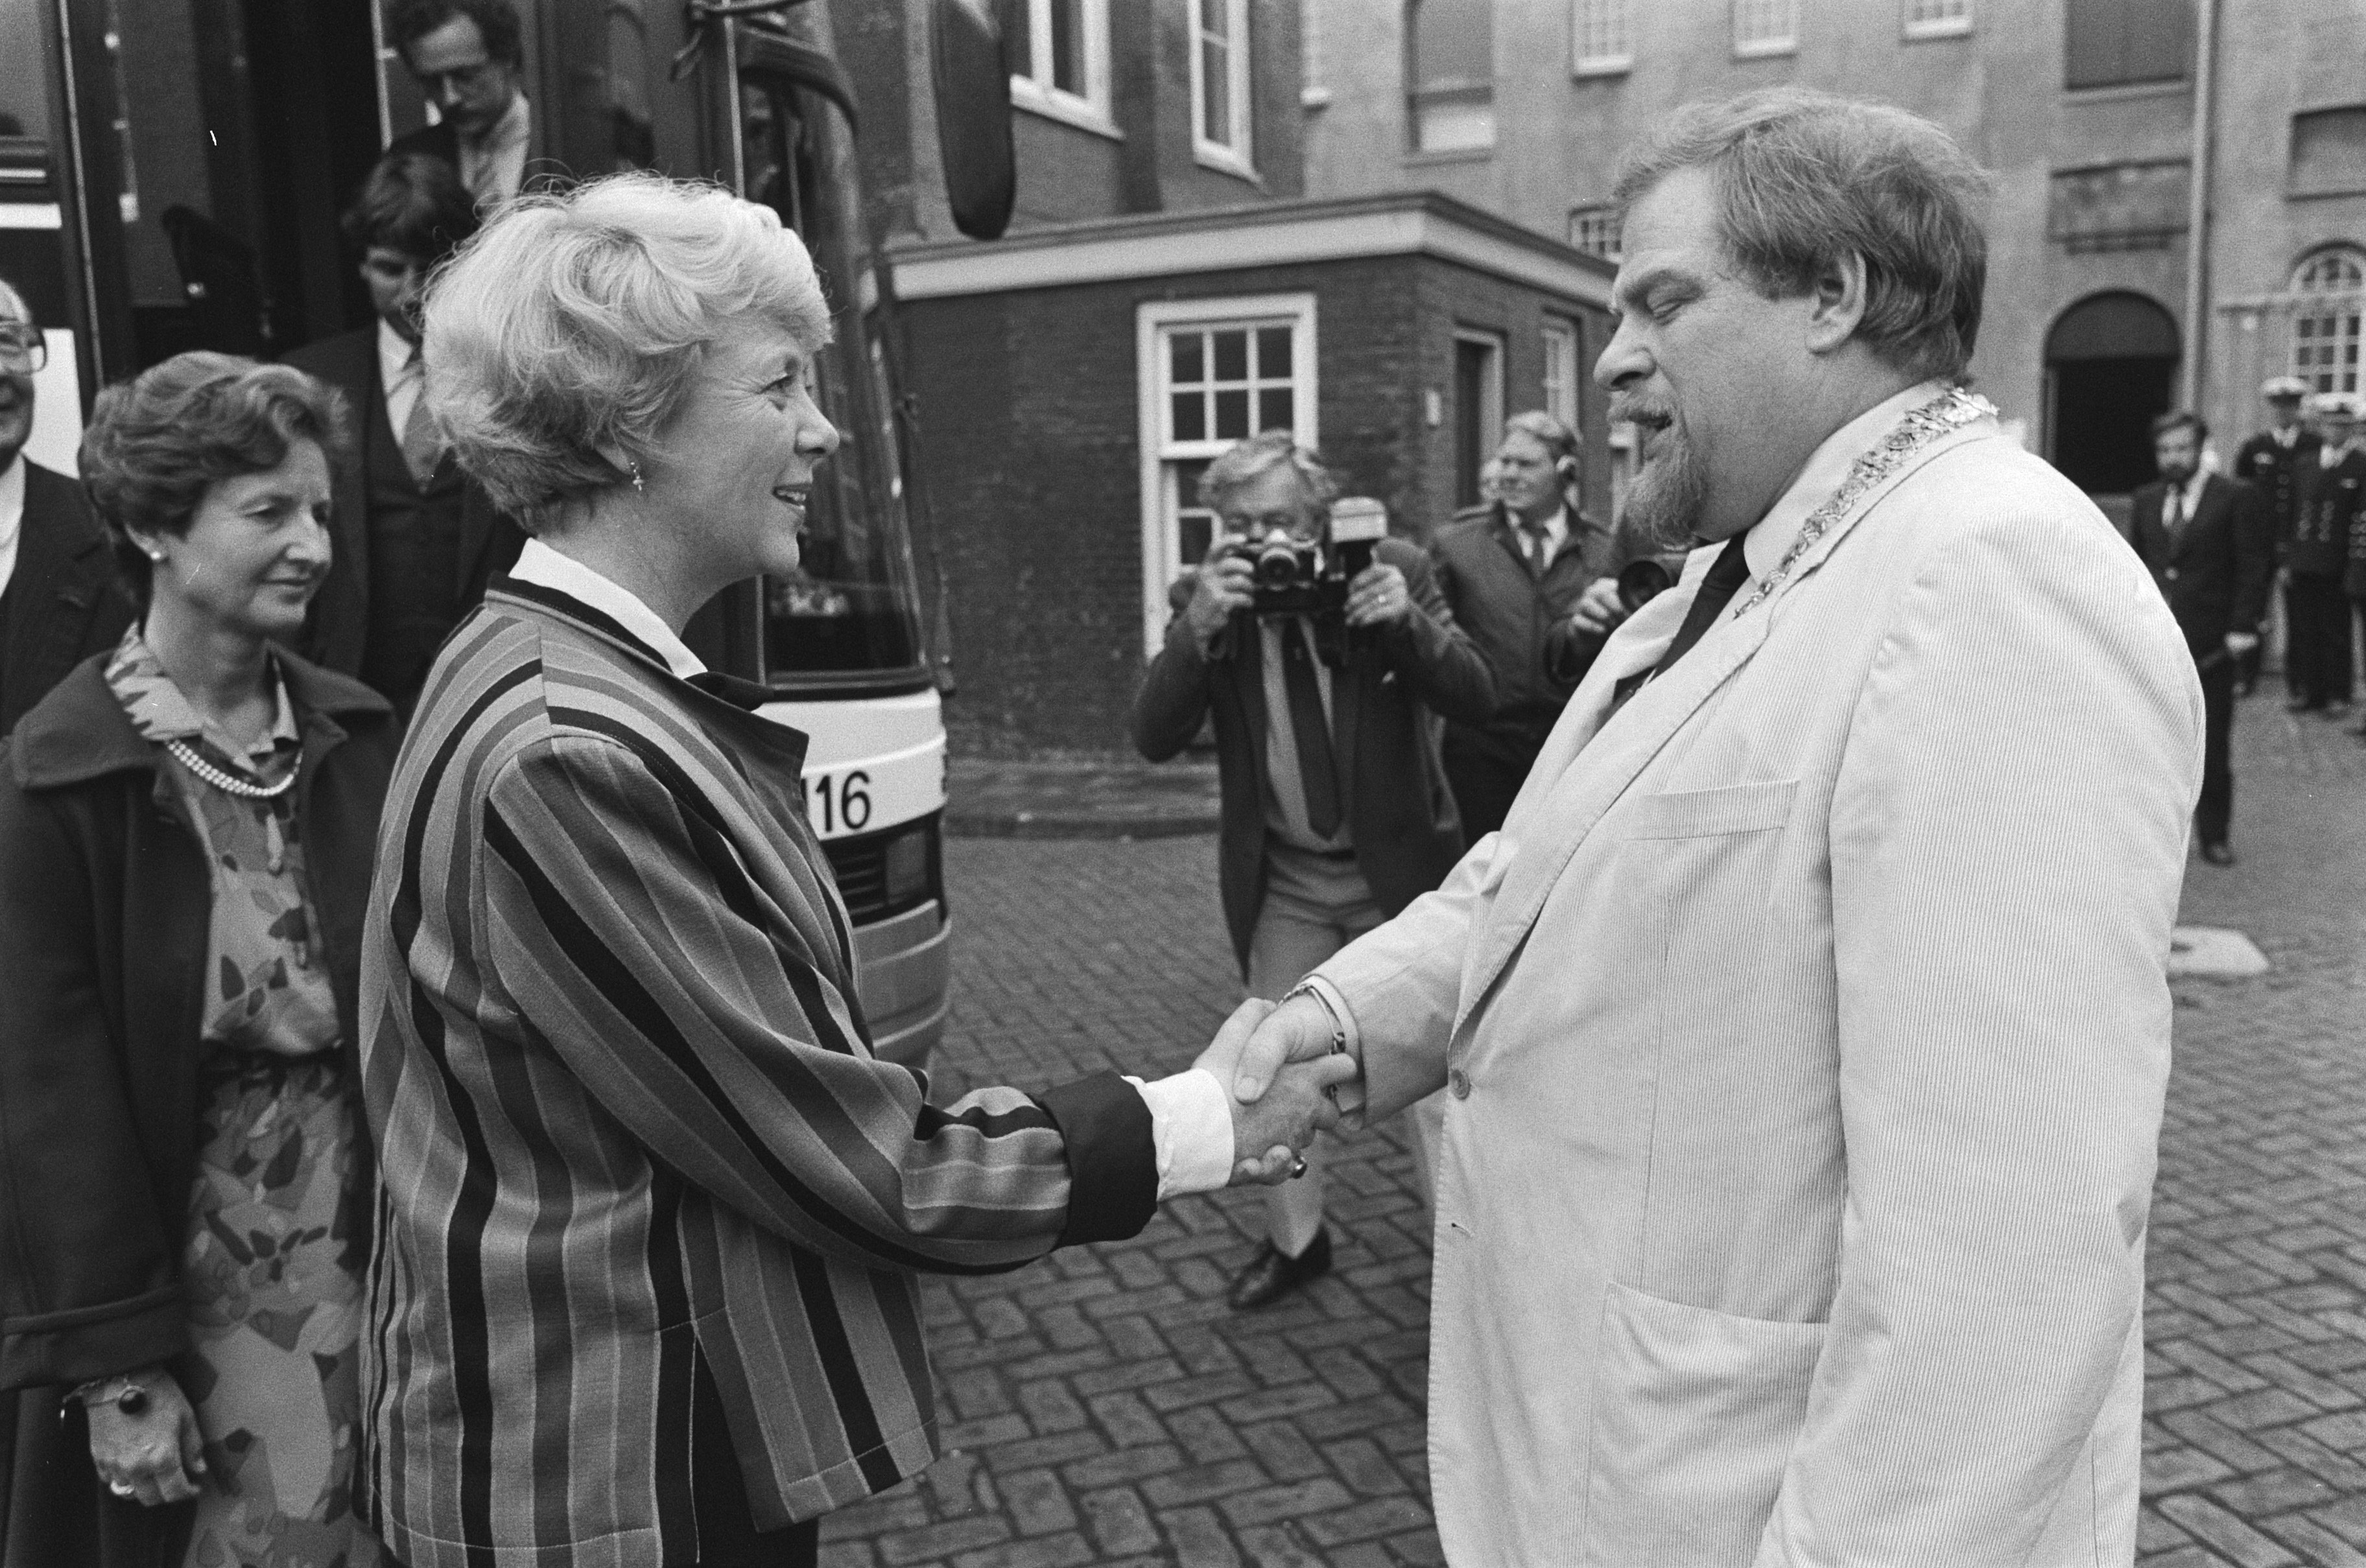 Icelandic President Ms. Vigdís Finnbogadóttir is greeted by Councilor Schaefer at the Maritime Museum in Amsterdam